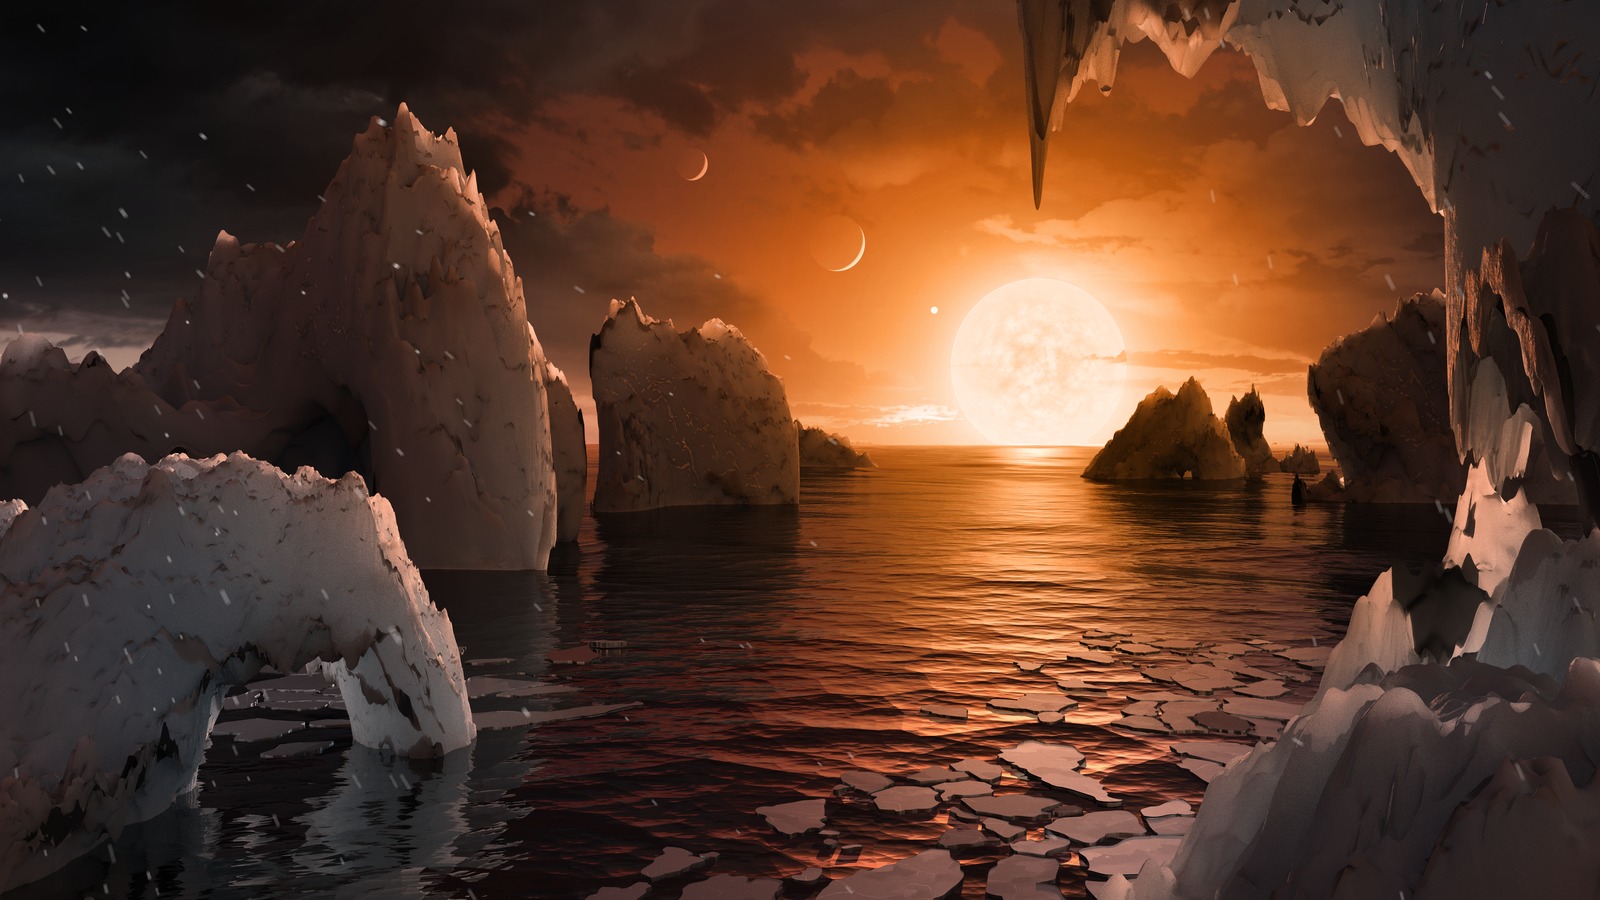 Artist's concept of the surface of exoplanet TRAPPIST-1f.  In this image, you see several rock formations in the sea as a bright sun sets in the distance.